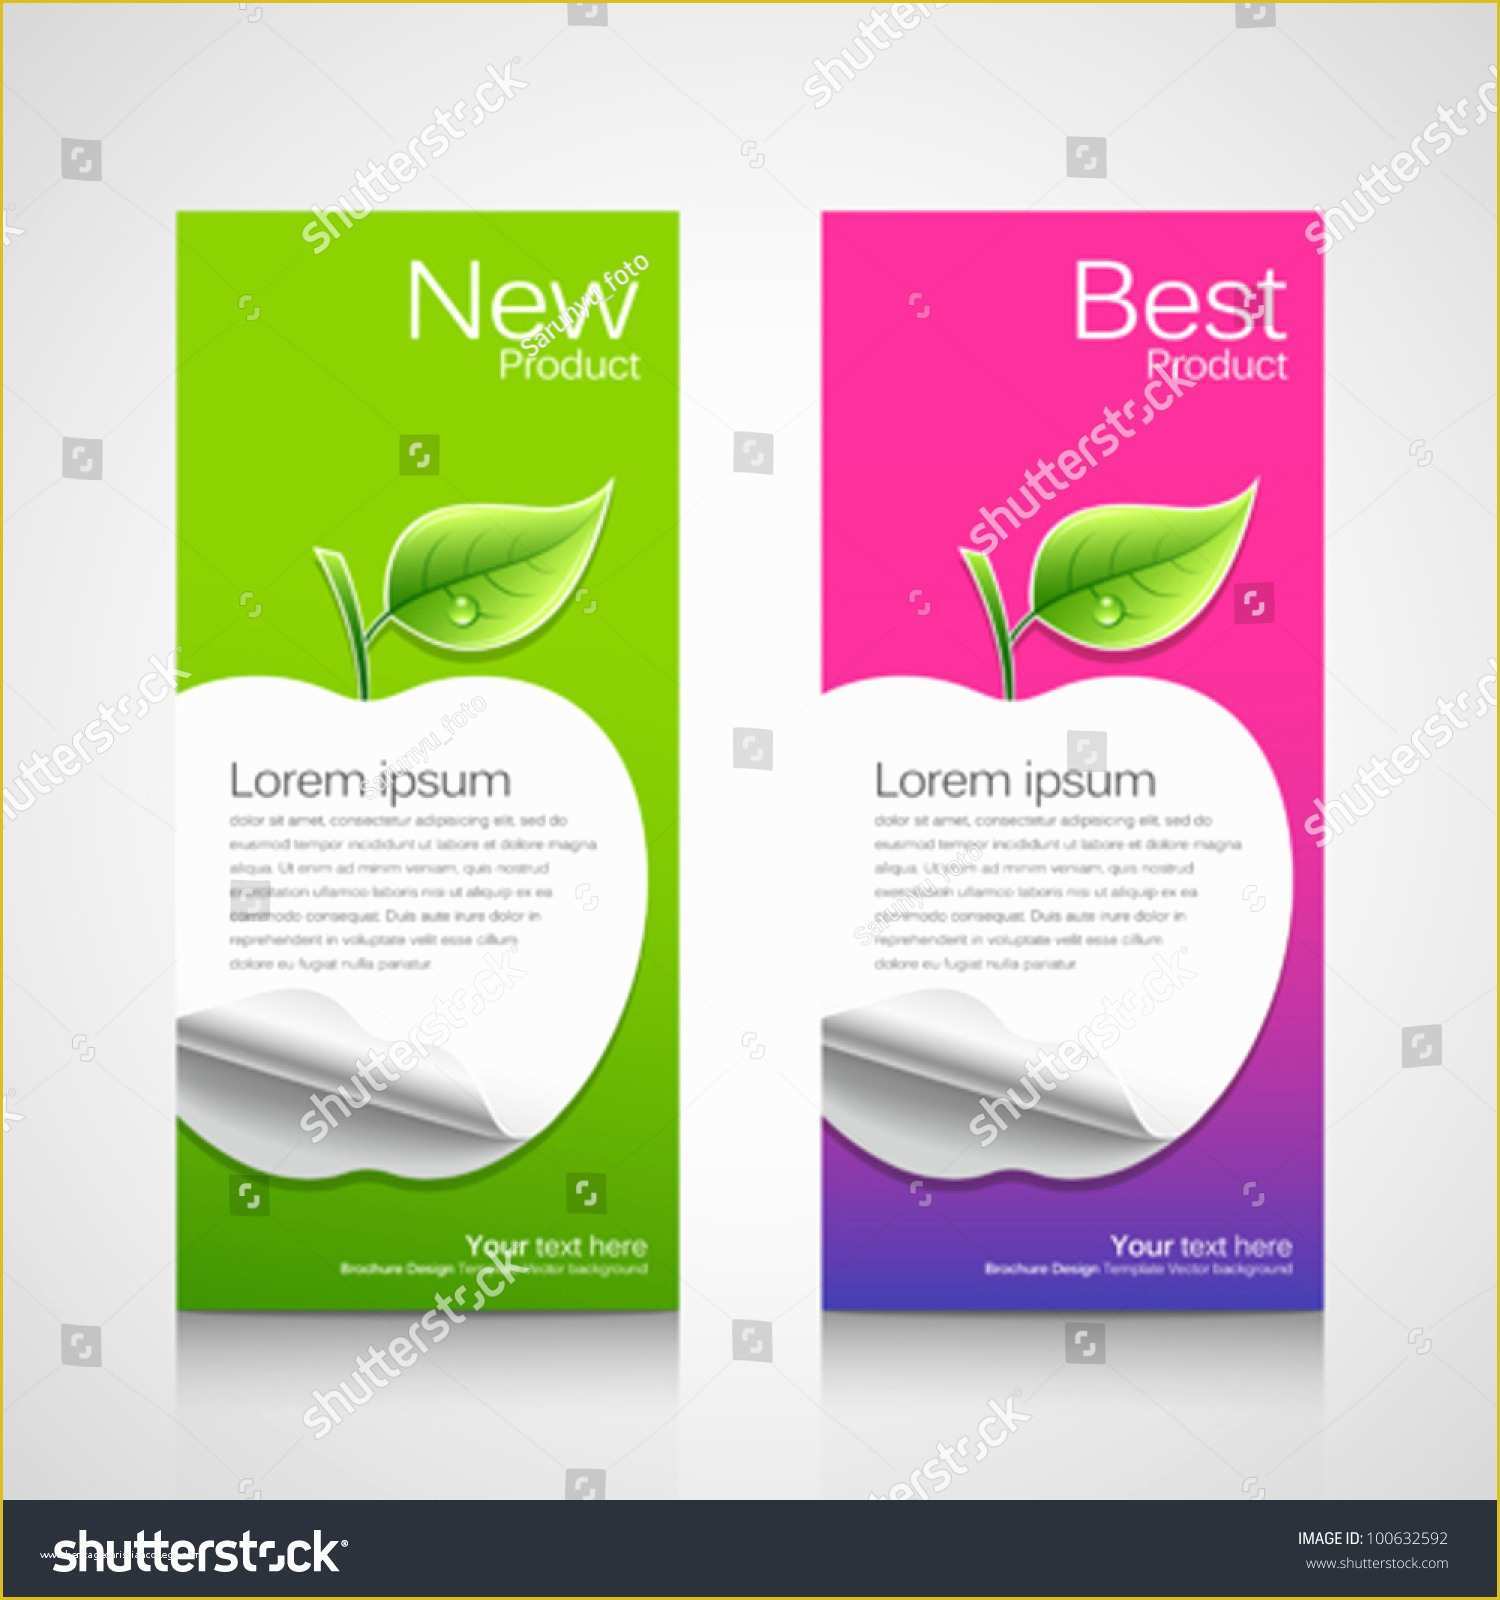 Free Apple Pages Templates Of Apple Flyer Templates Yourweek 20d29aeca25e